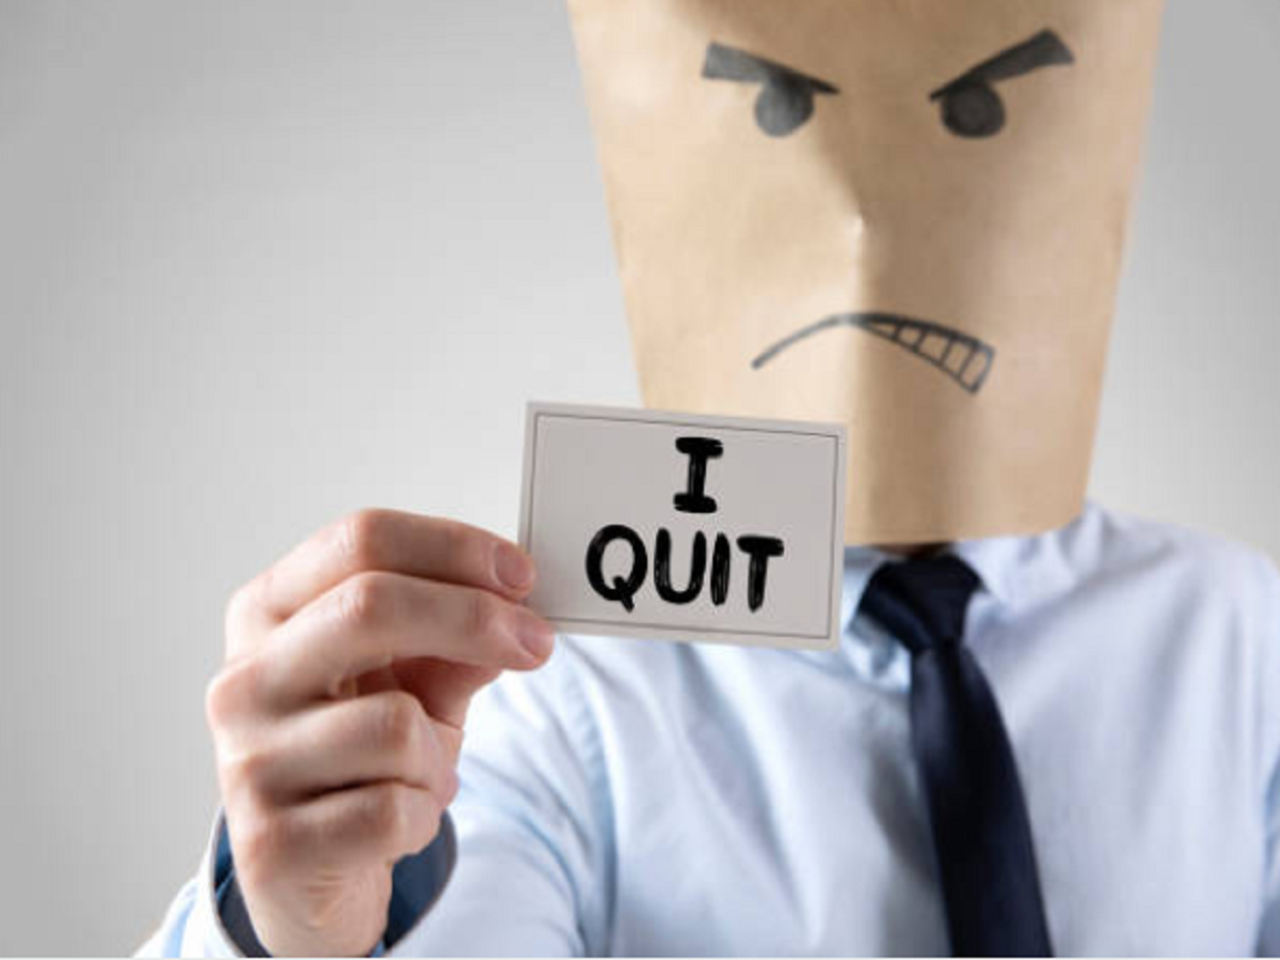 Is rage-quitting on your mind? Drop the idea now! - Times of India